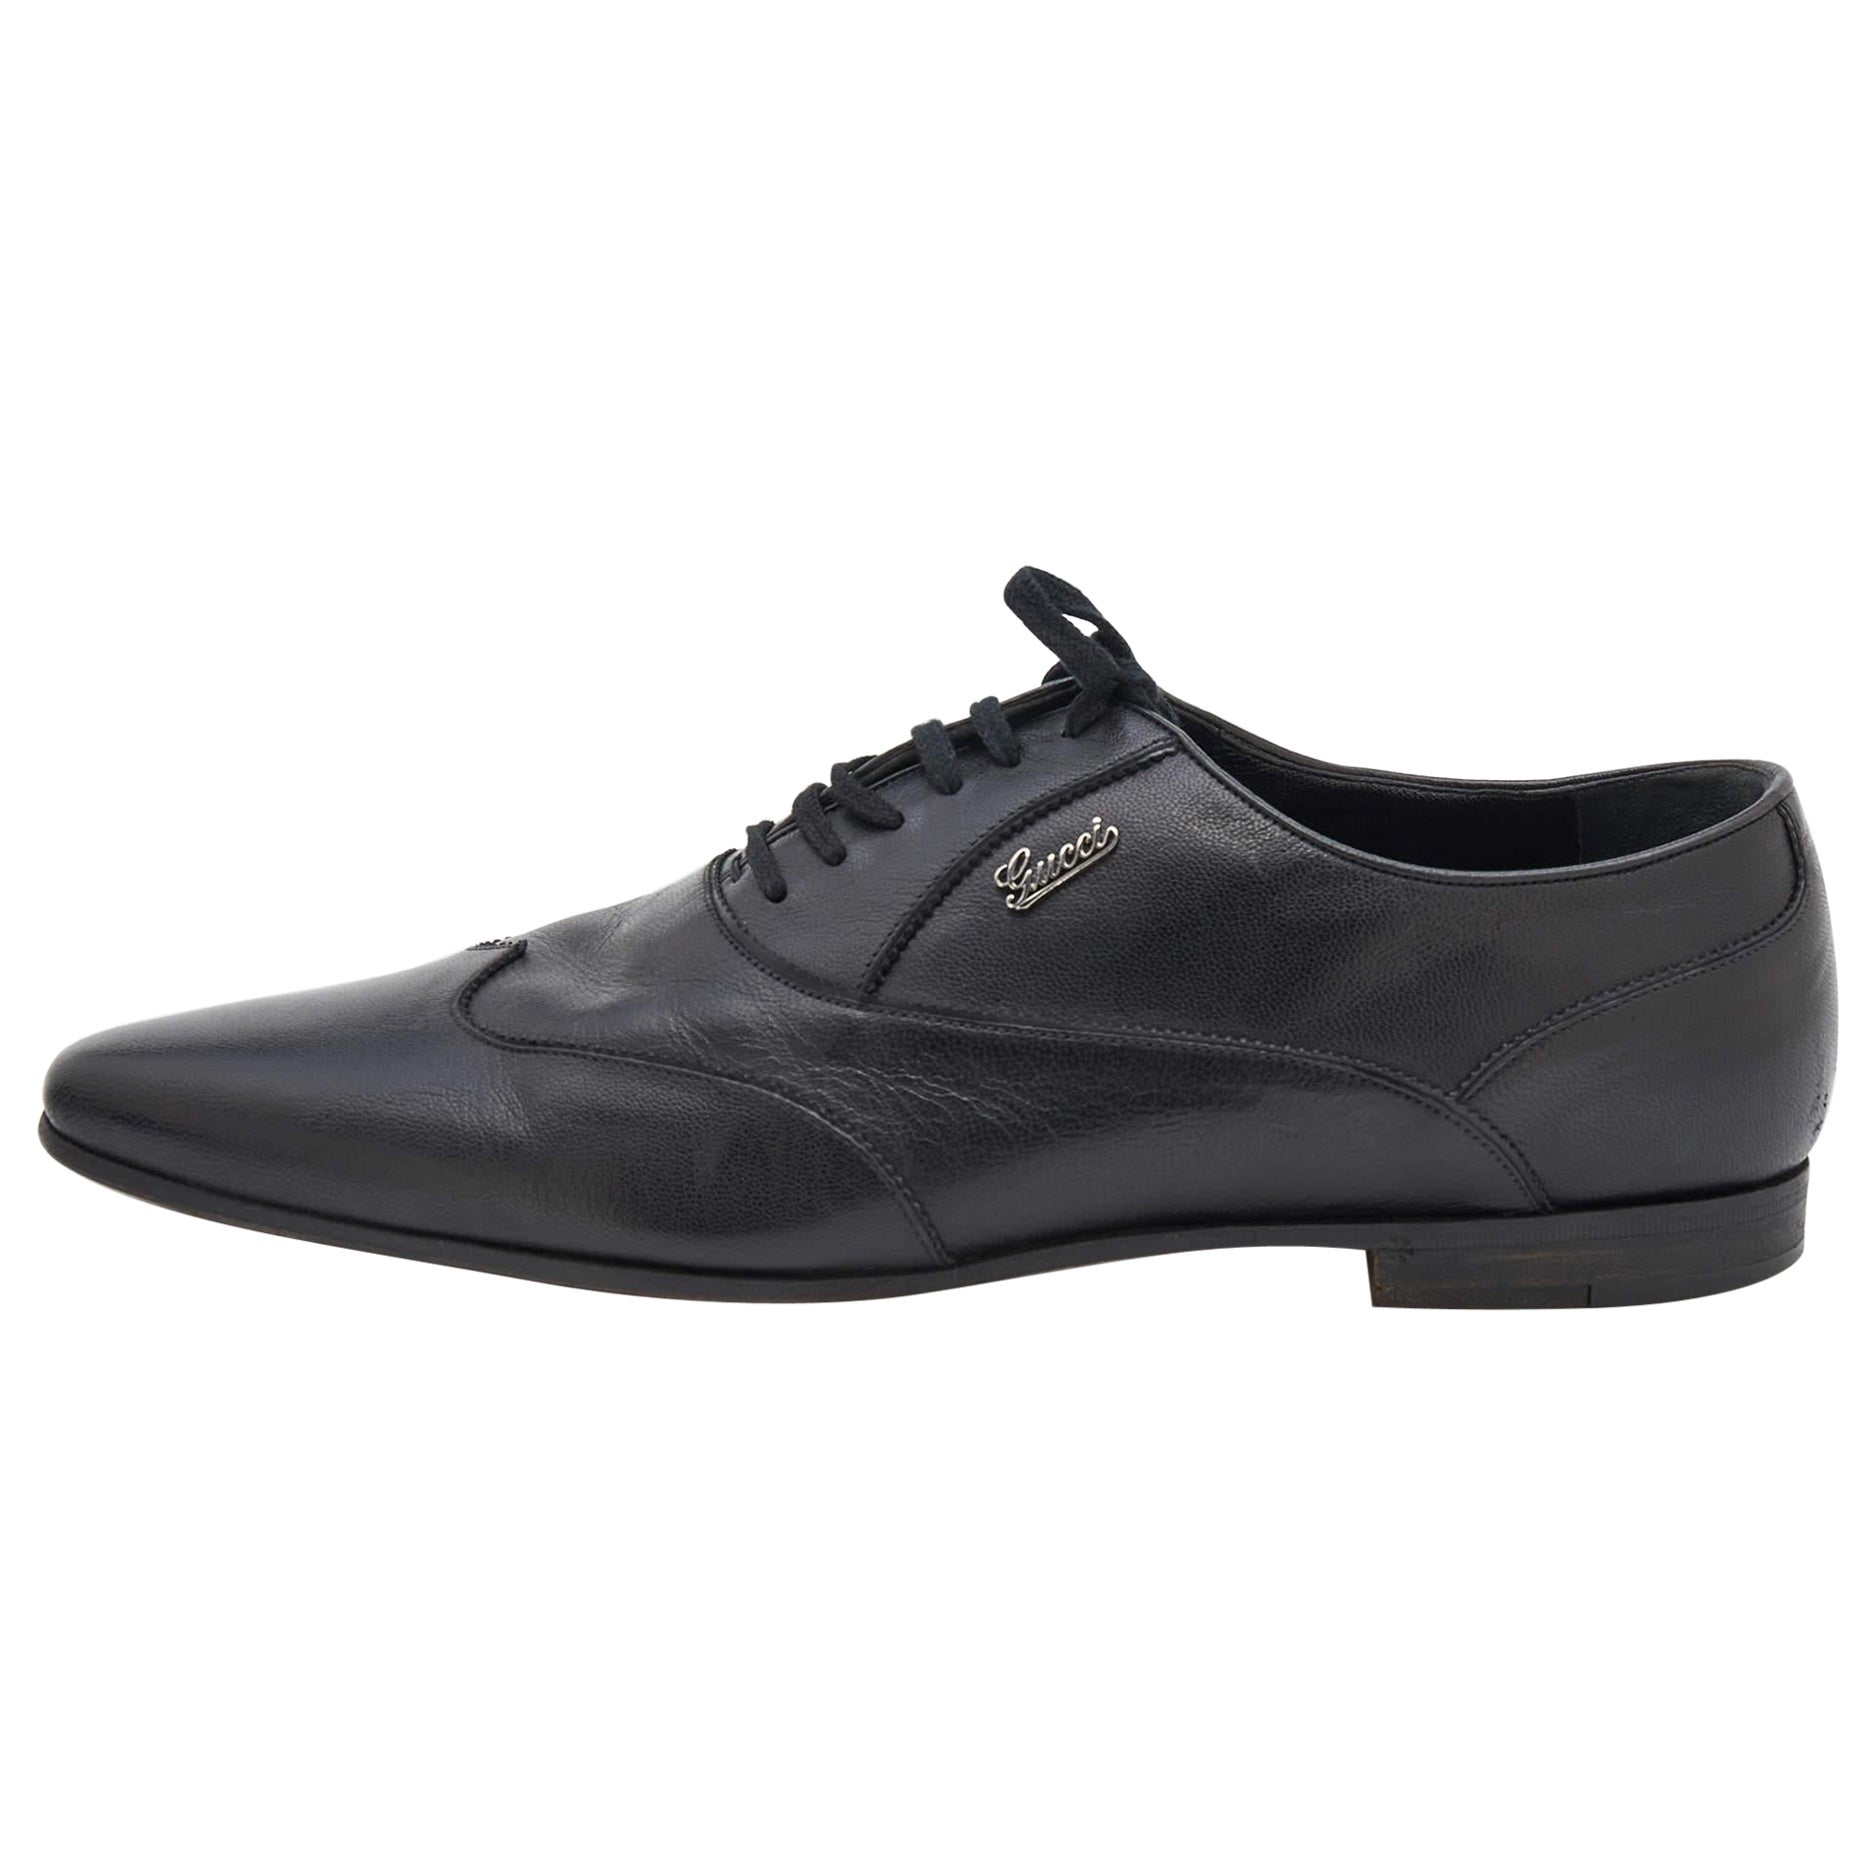 Gucci Black Leather Wingtip Lace Up Oxfords Size 43